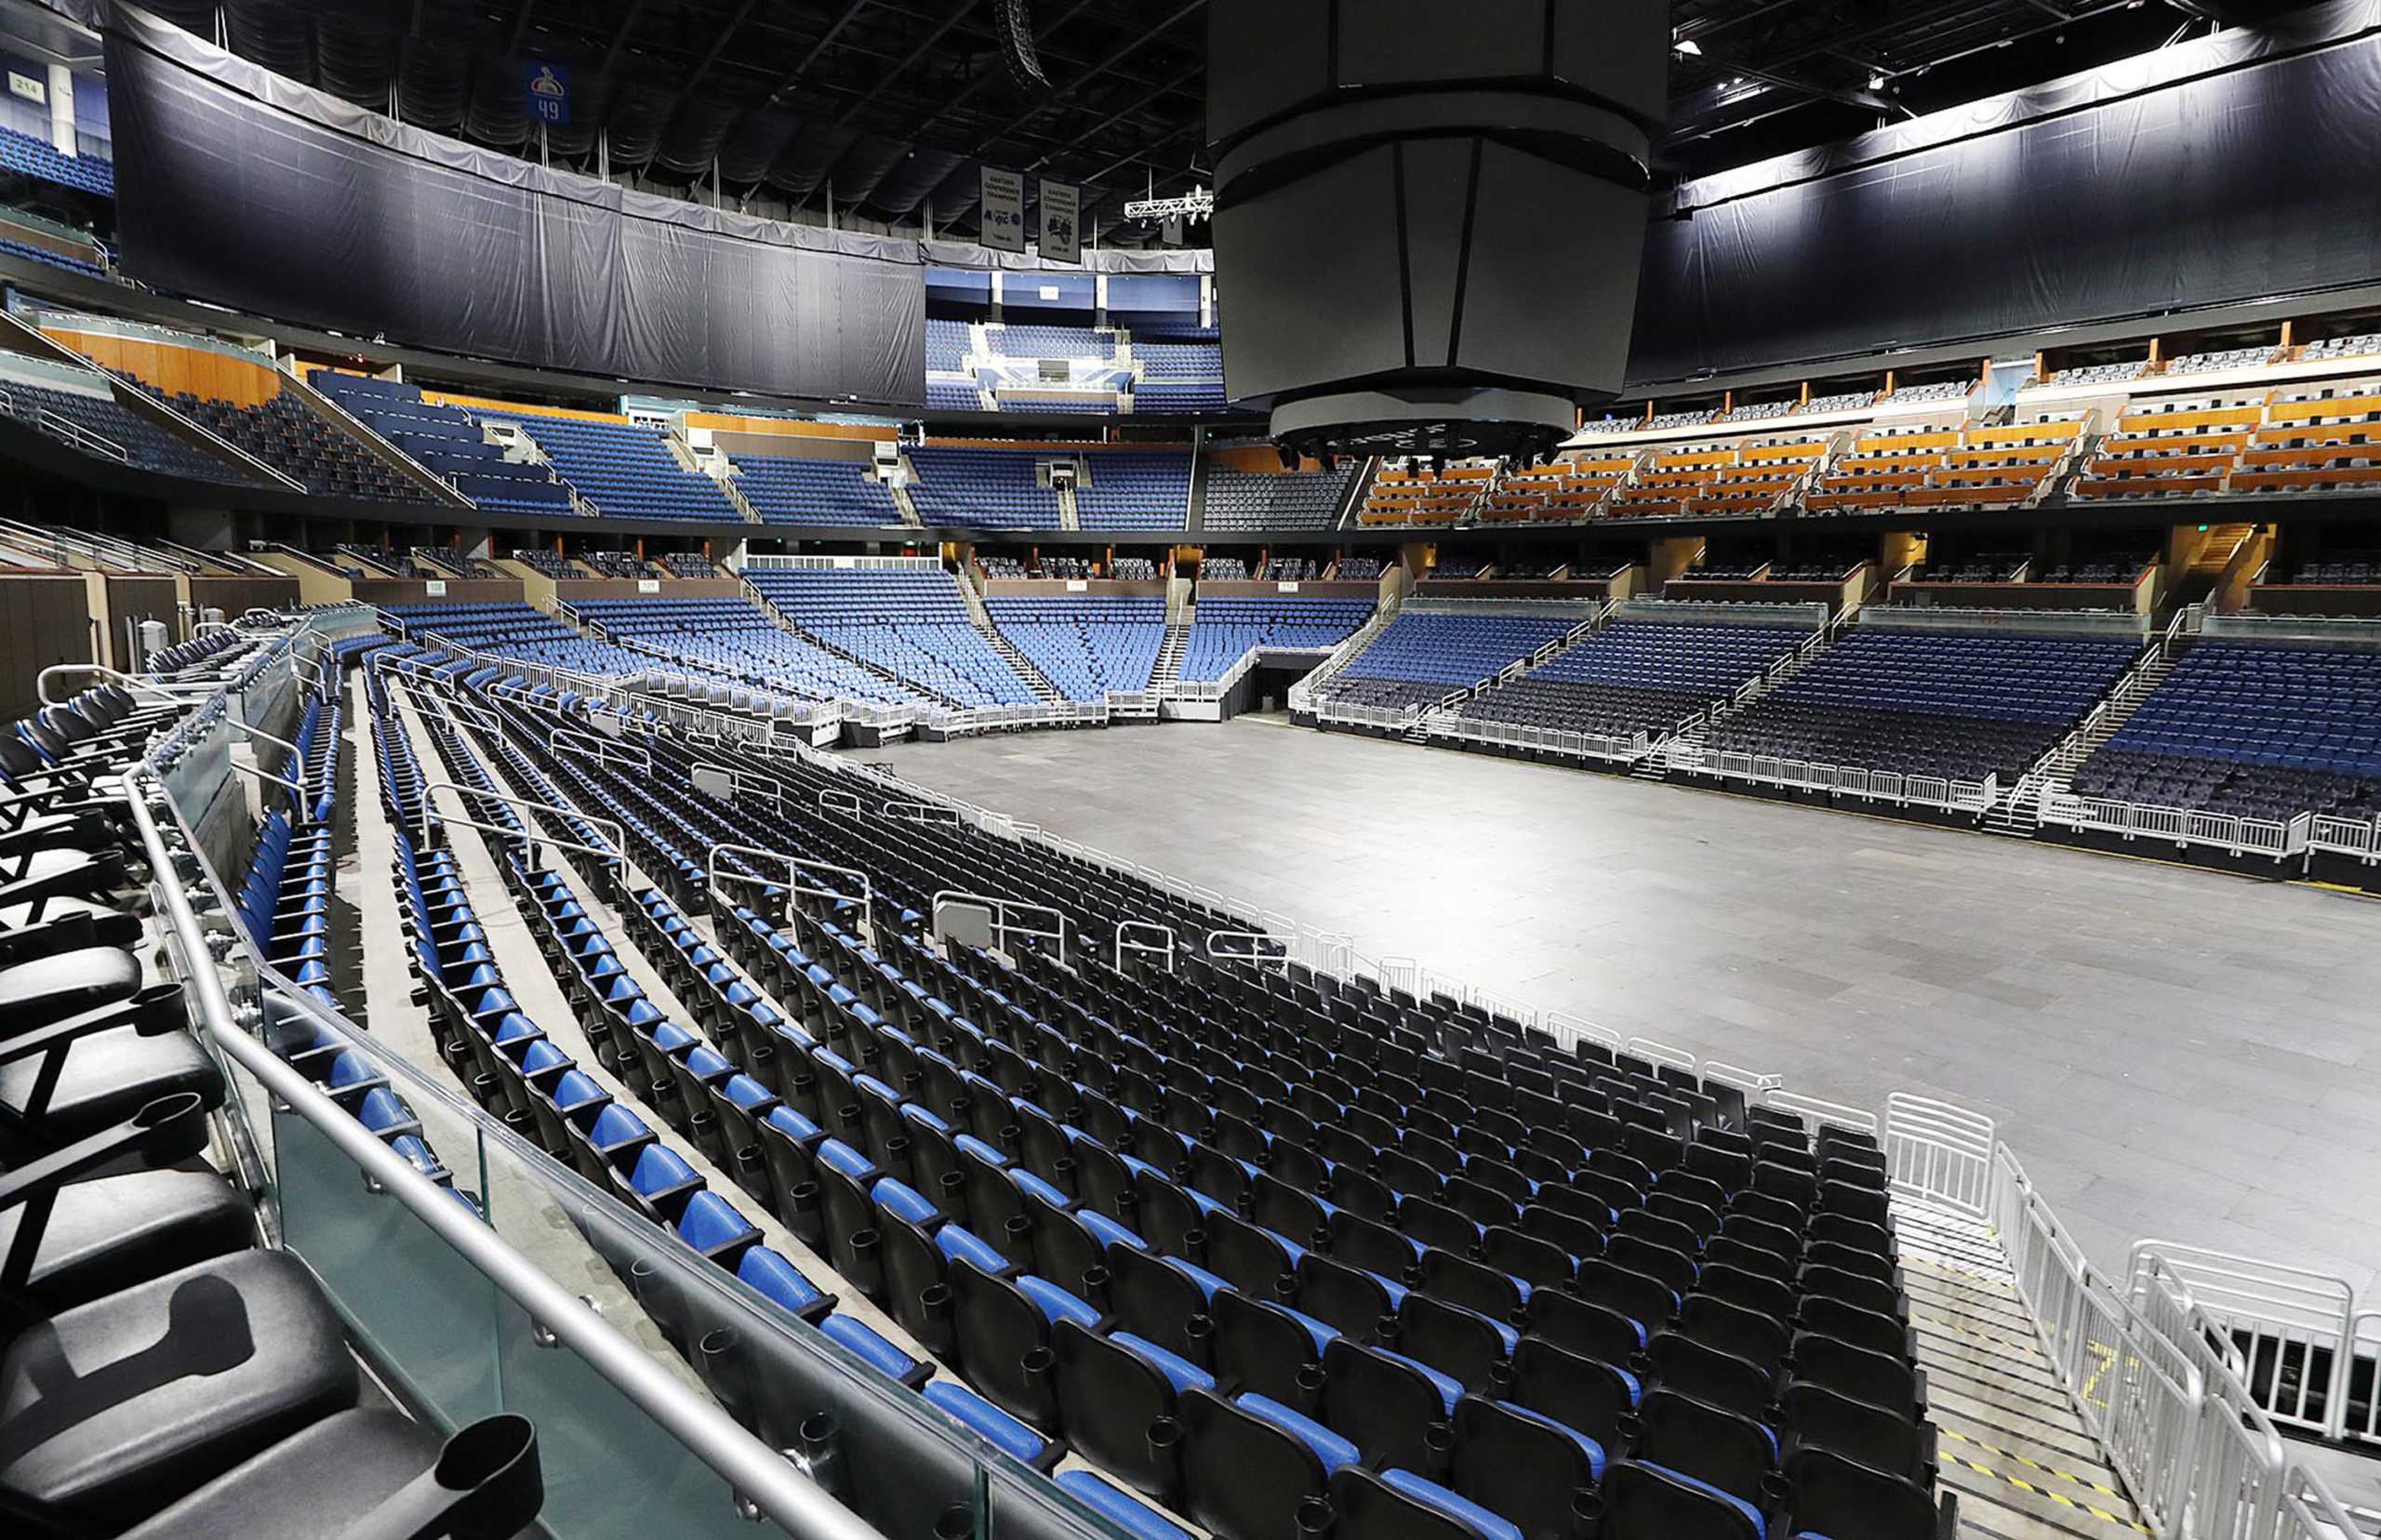 The seats are empty at the Amway Center in Orlando, home of the NBAs Orlando Magic, on Thursday, March 12, 2020. The NBA has suspended the season due to the coronavirus -- as have other sports. (Stephen M. Dowell/Orlando Sentinel/TNS)